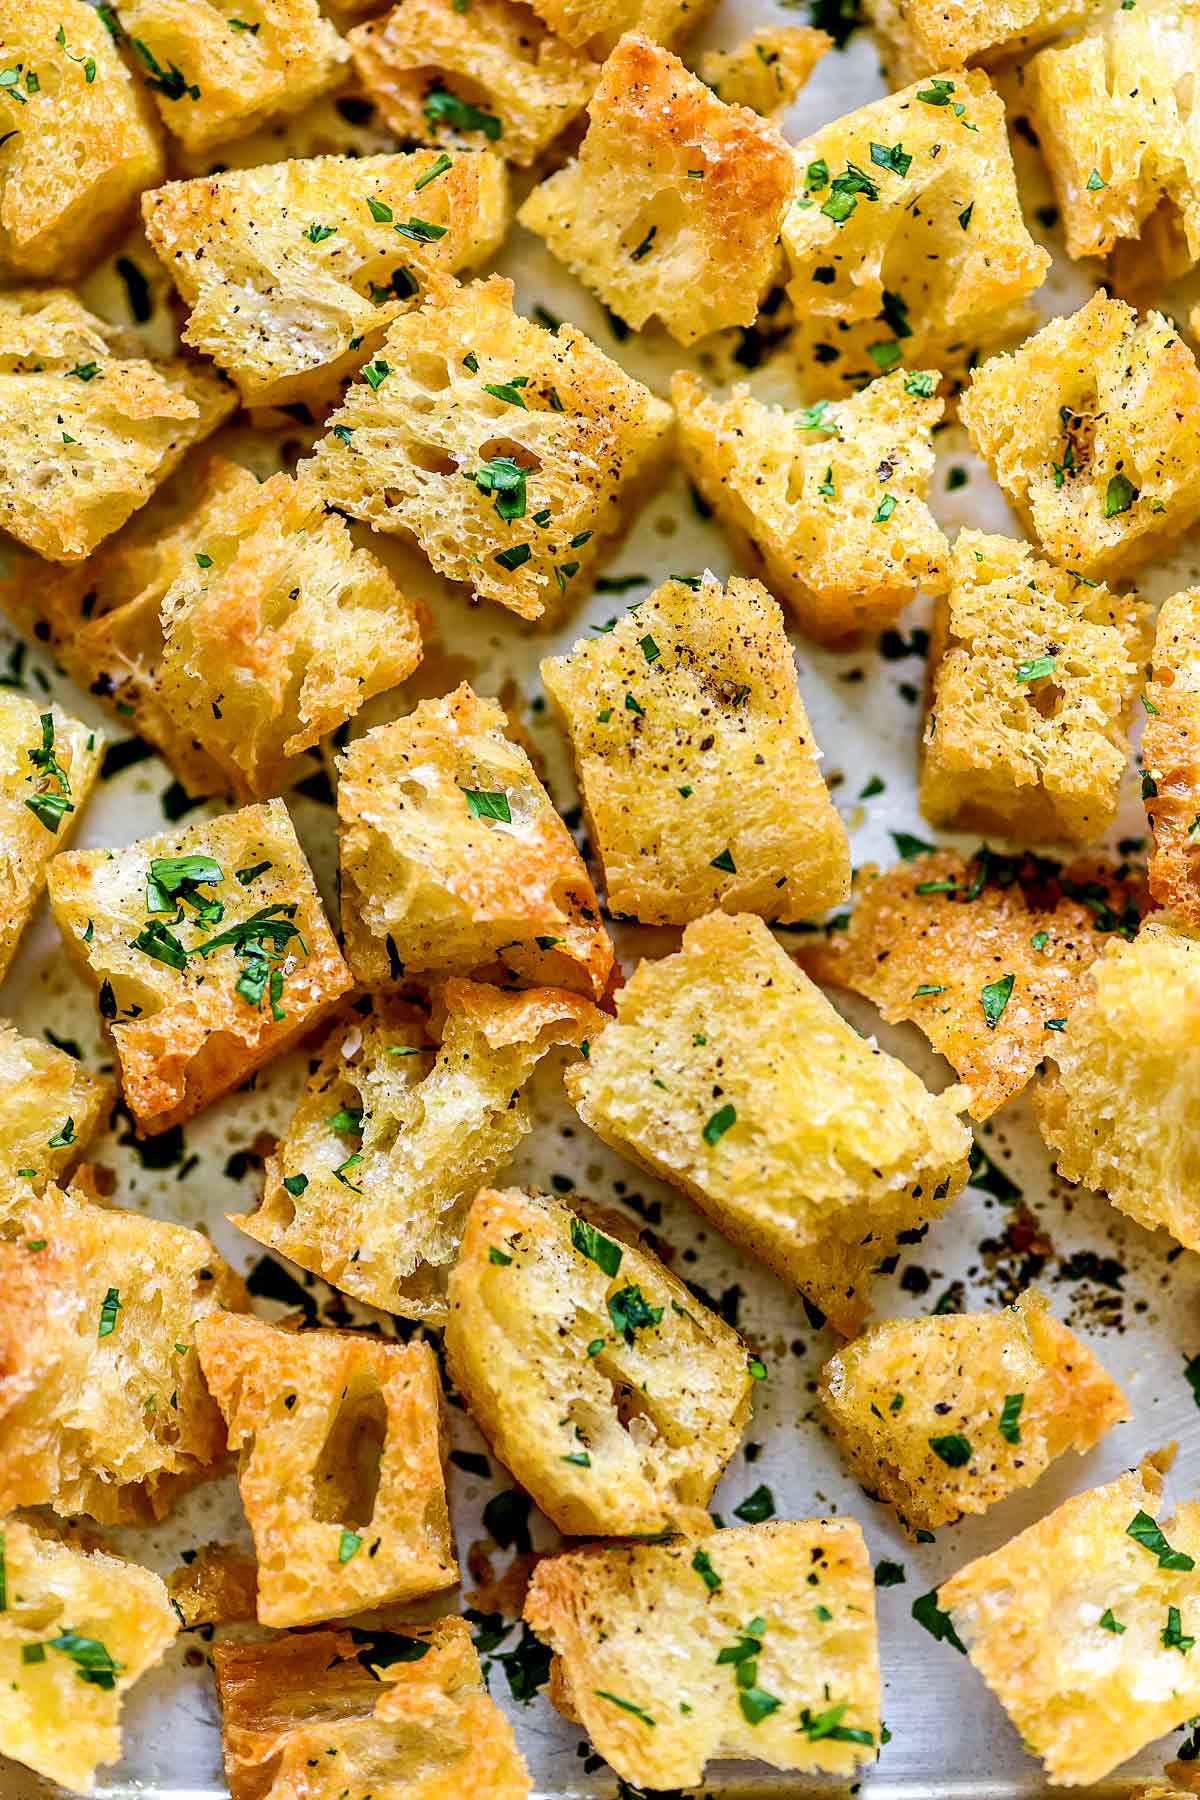 How to Make Croutons? - Top Cookery